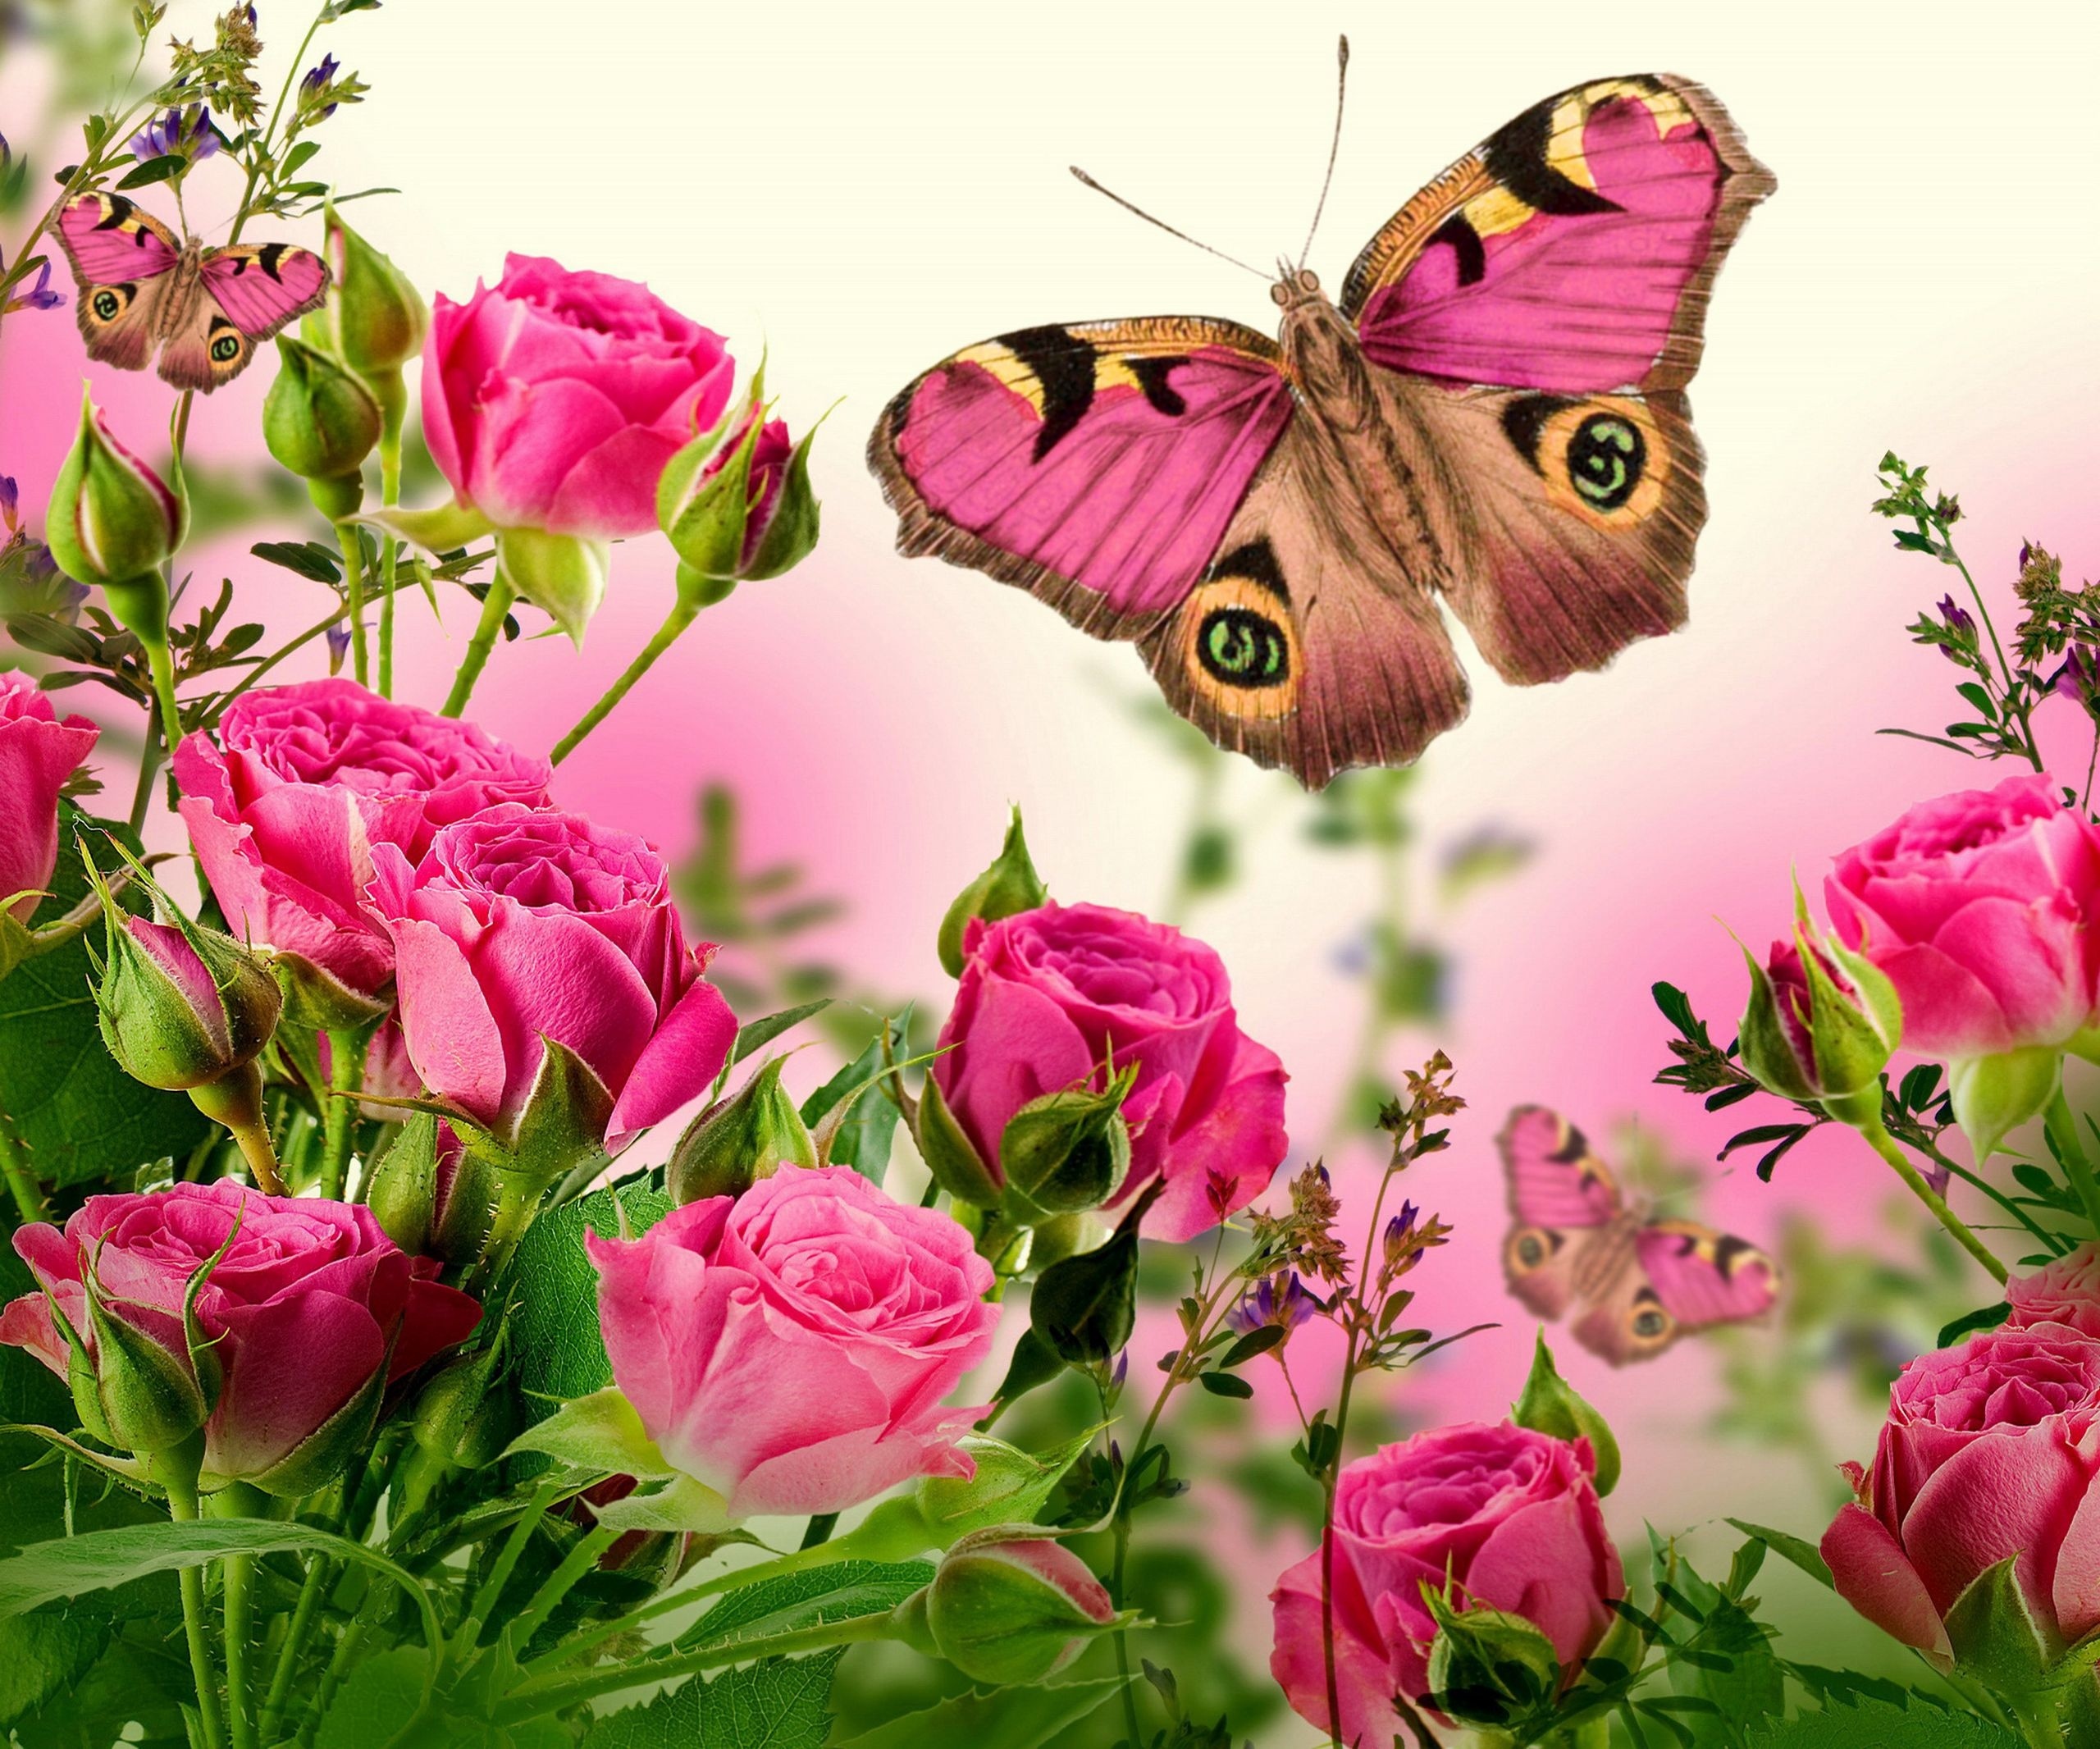 Roses and Butterfly